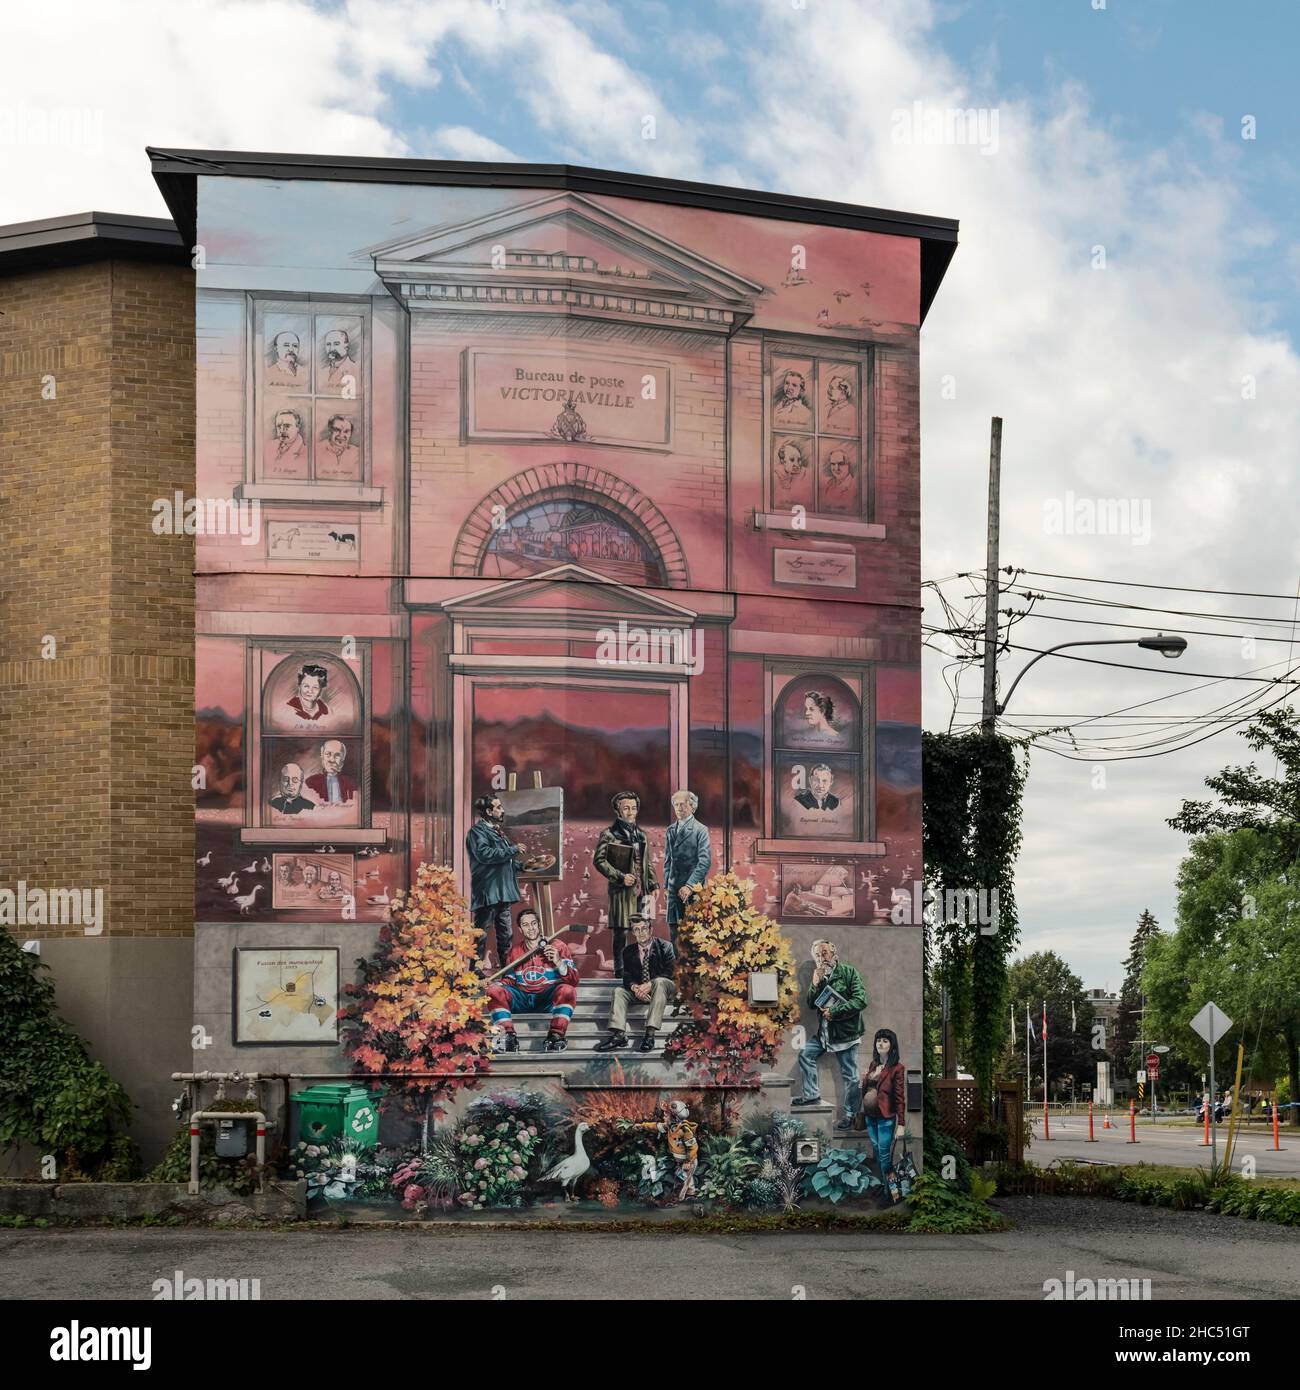 Victoriaville, Quebec, Canada - Sept 6, 2021: Mural for the 150 years of Victoriaville, illustration of its history and its dynamism. Located in the c Stock Photo